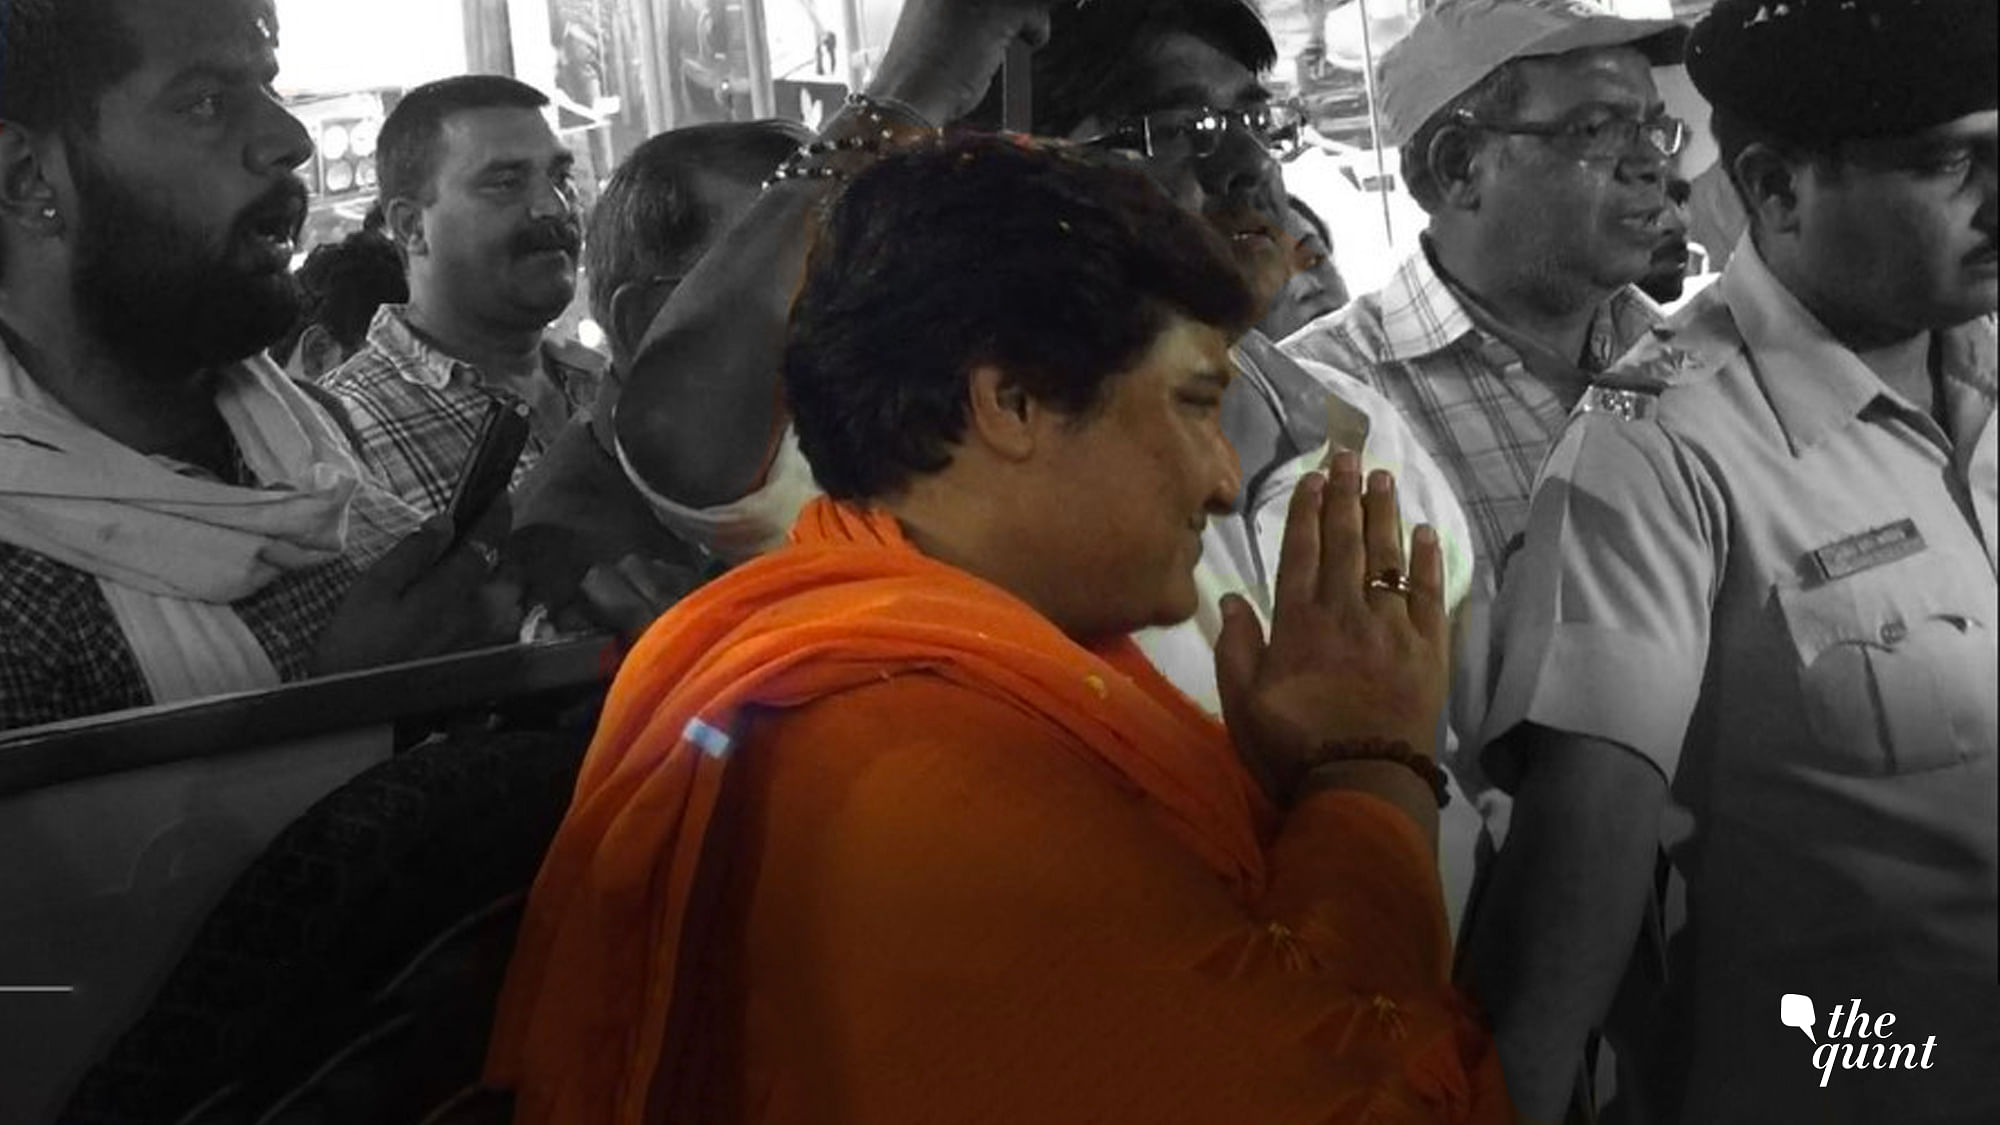 Pragya Singh Thakur avoided questions when The Quint’s reporter went on a campaign trail with the firebrand leader.